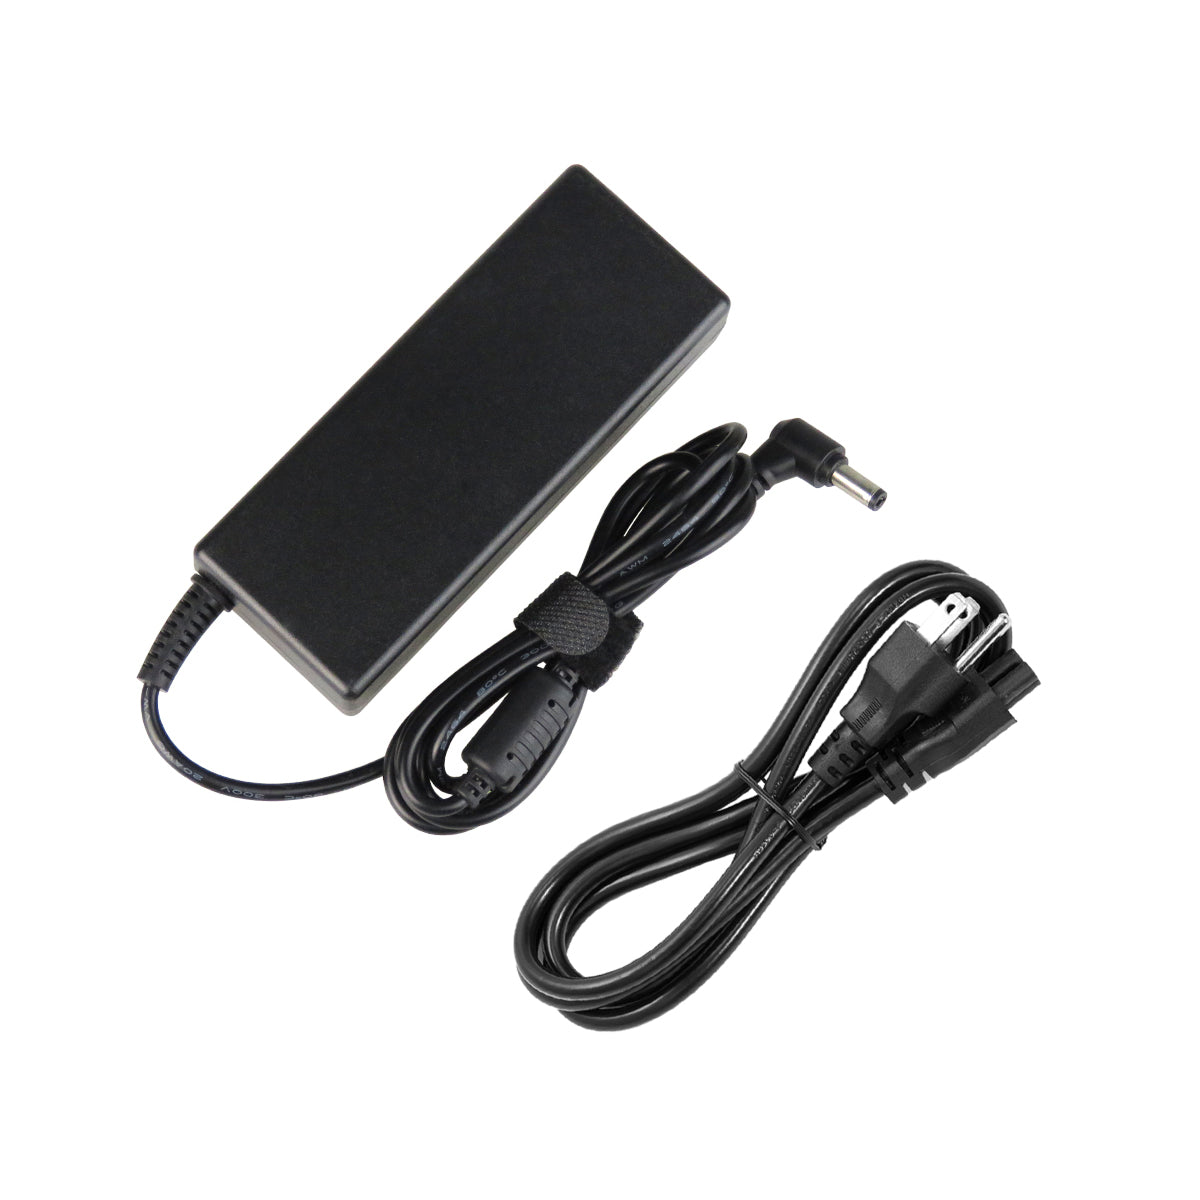 AC Adapter Charger for ASUS A83SJ Laptop.